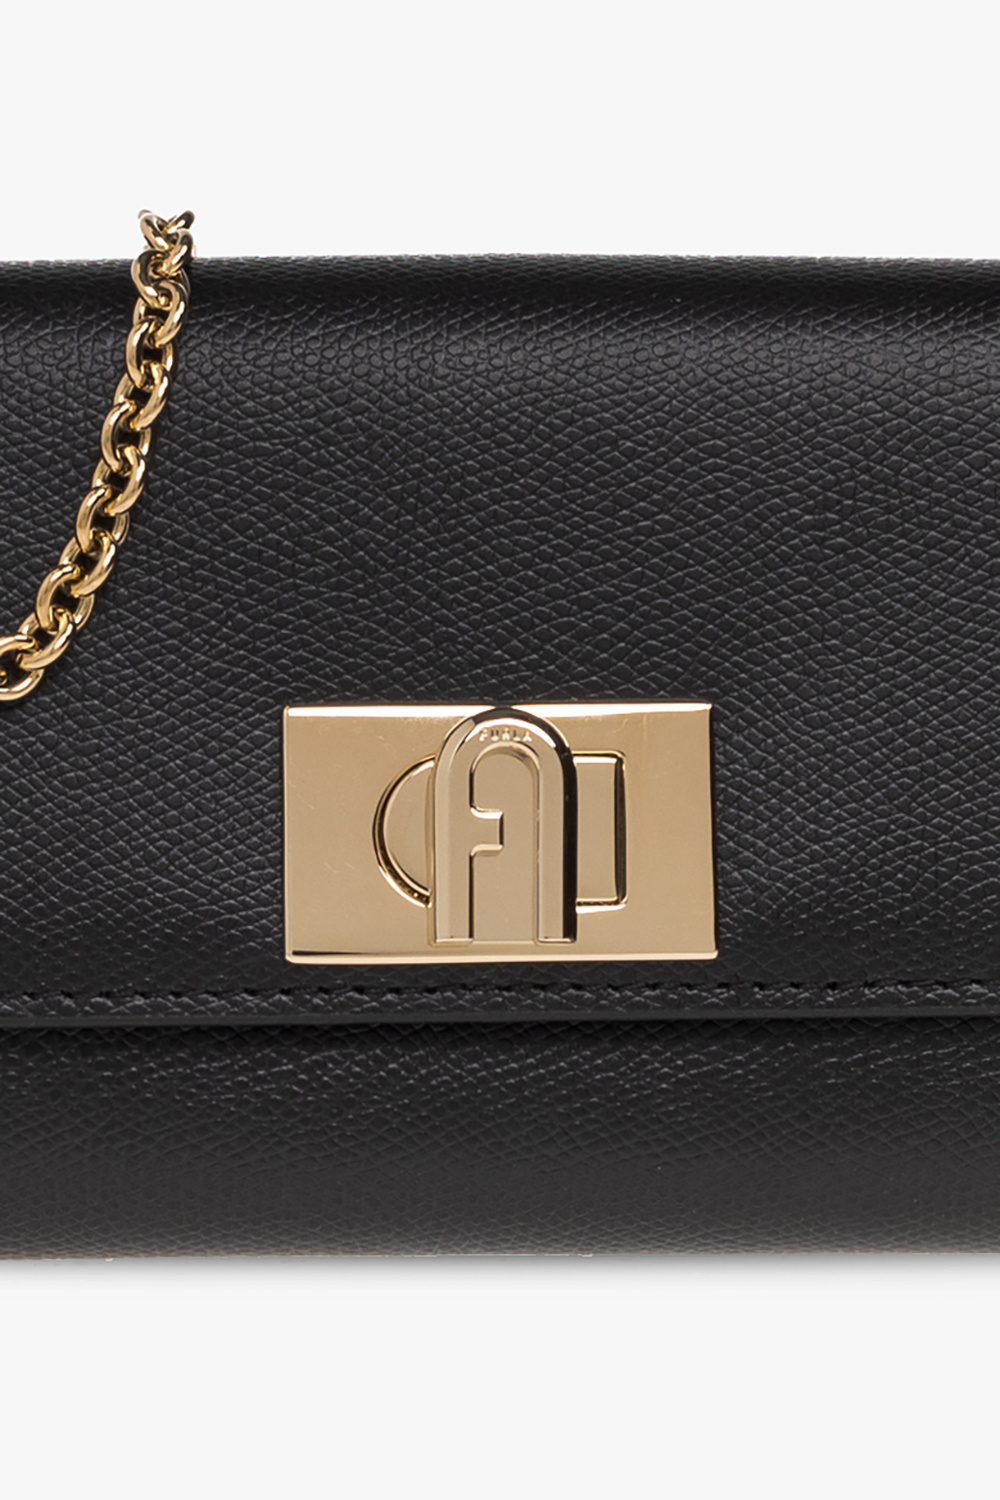 Furla ‘1927’ for the perfect gift that will delight everyone